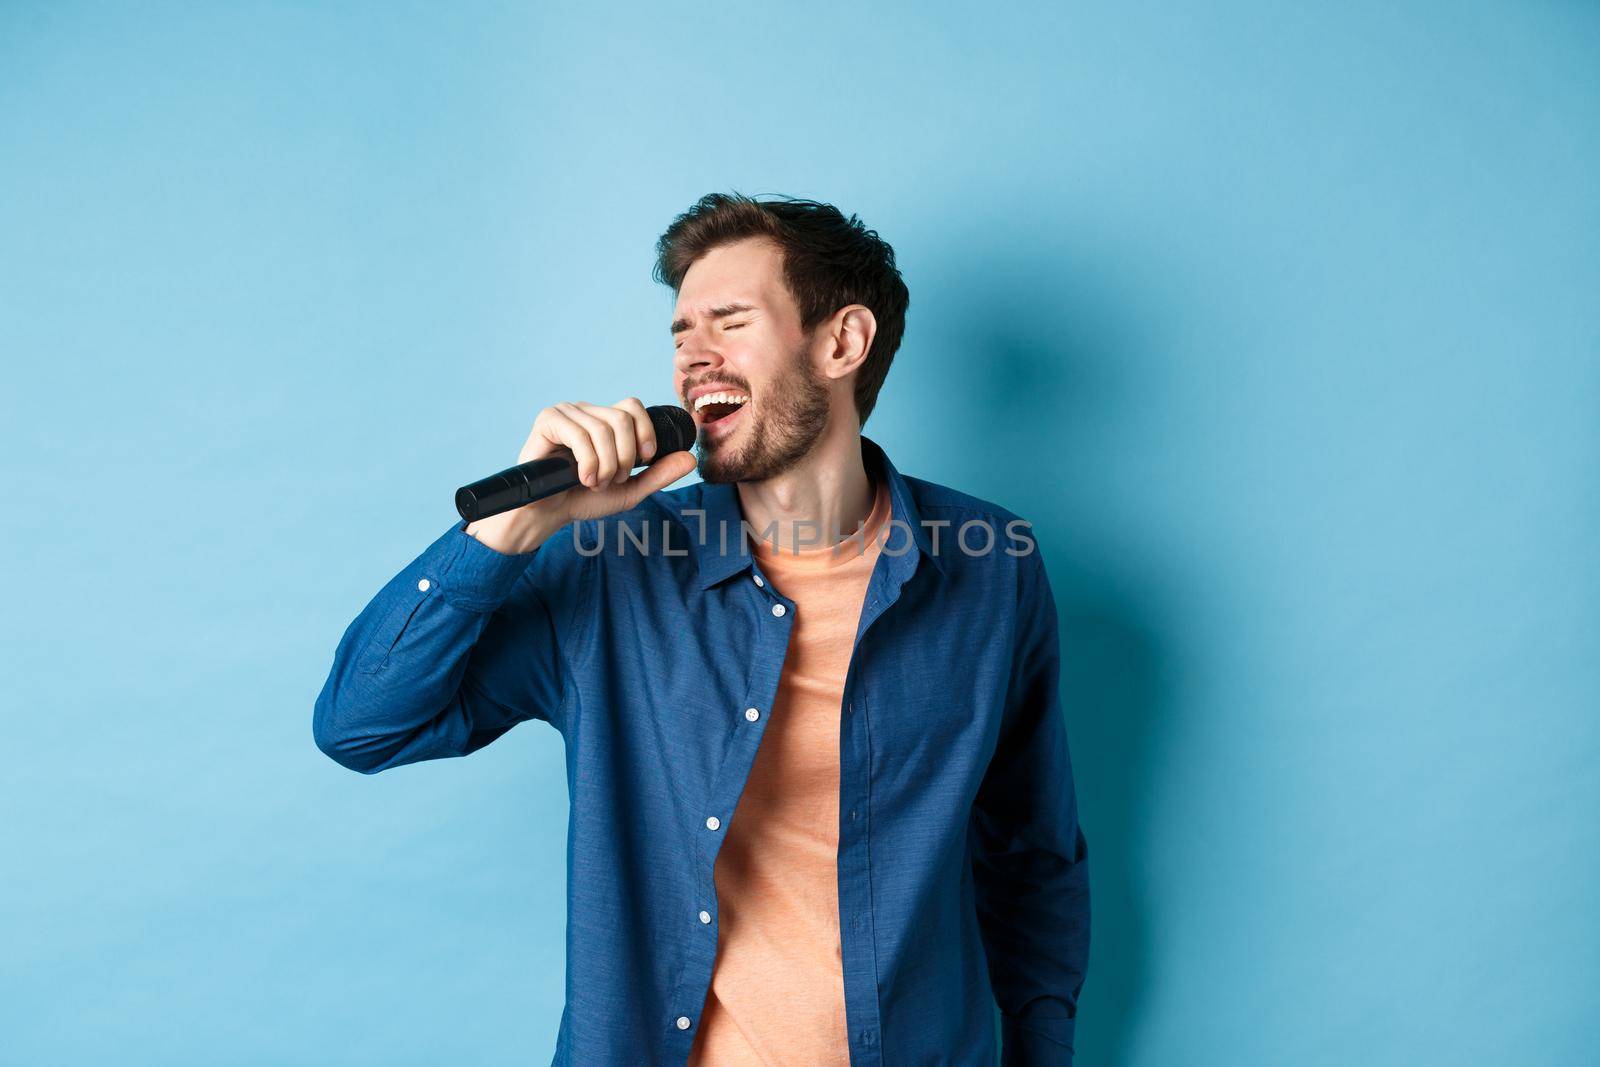 Carefree guy singing karaoke with microphone, perform a song, standing on blue background. Copy space